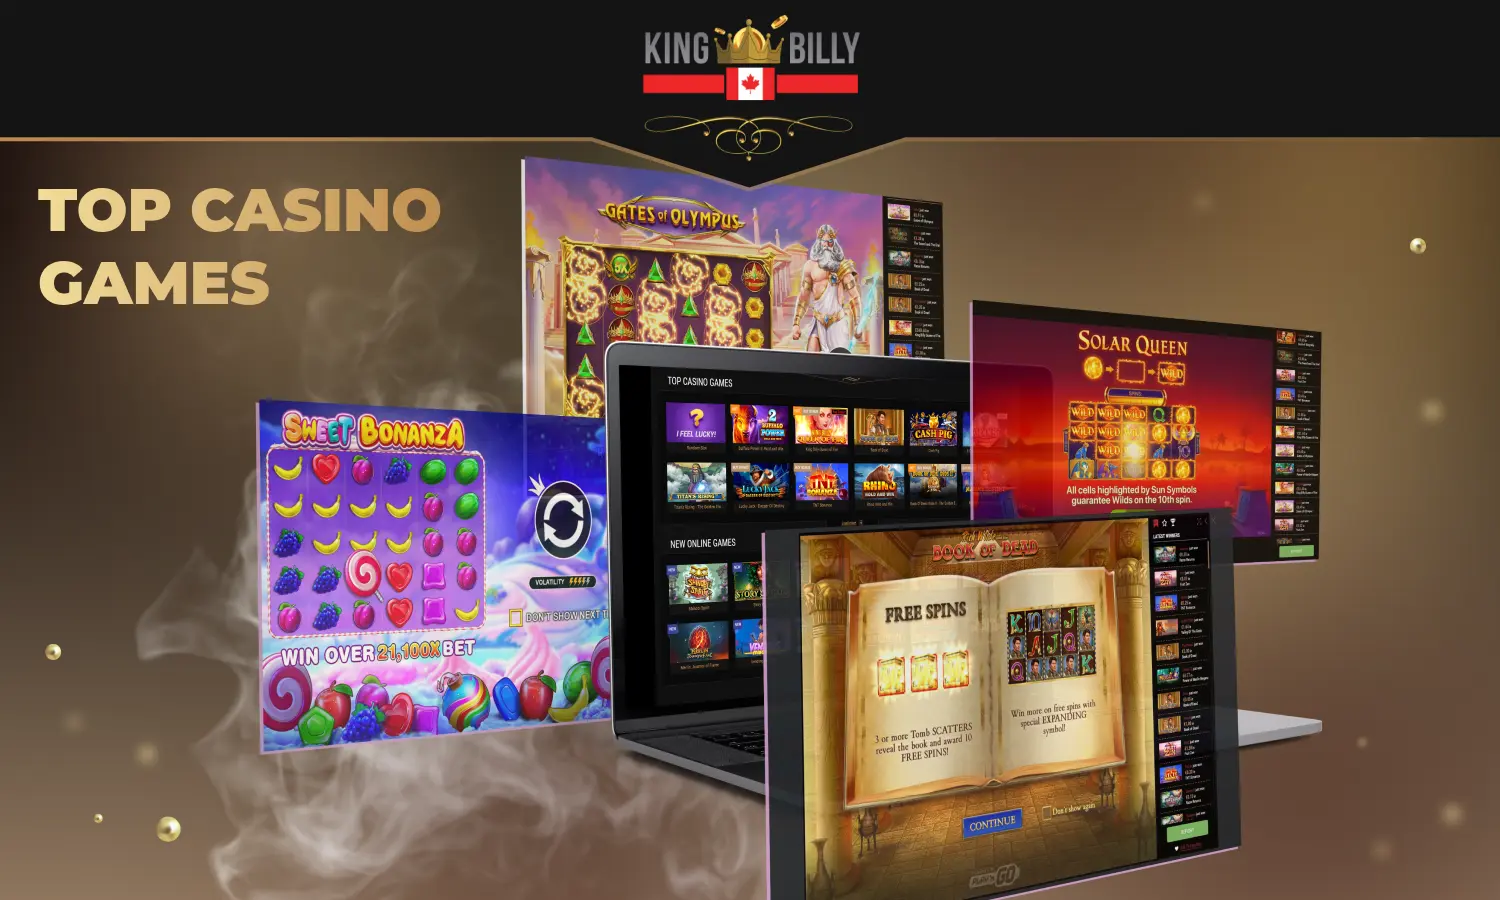 Canadian players have access to all the top games at King Billy Casino